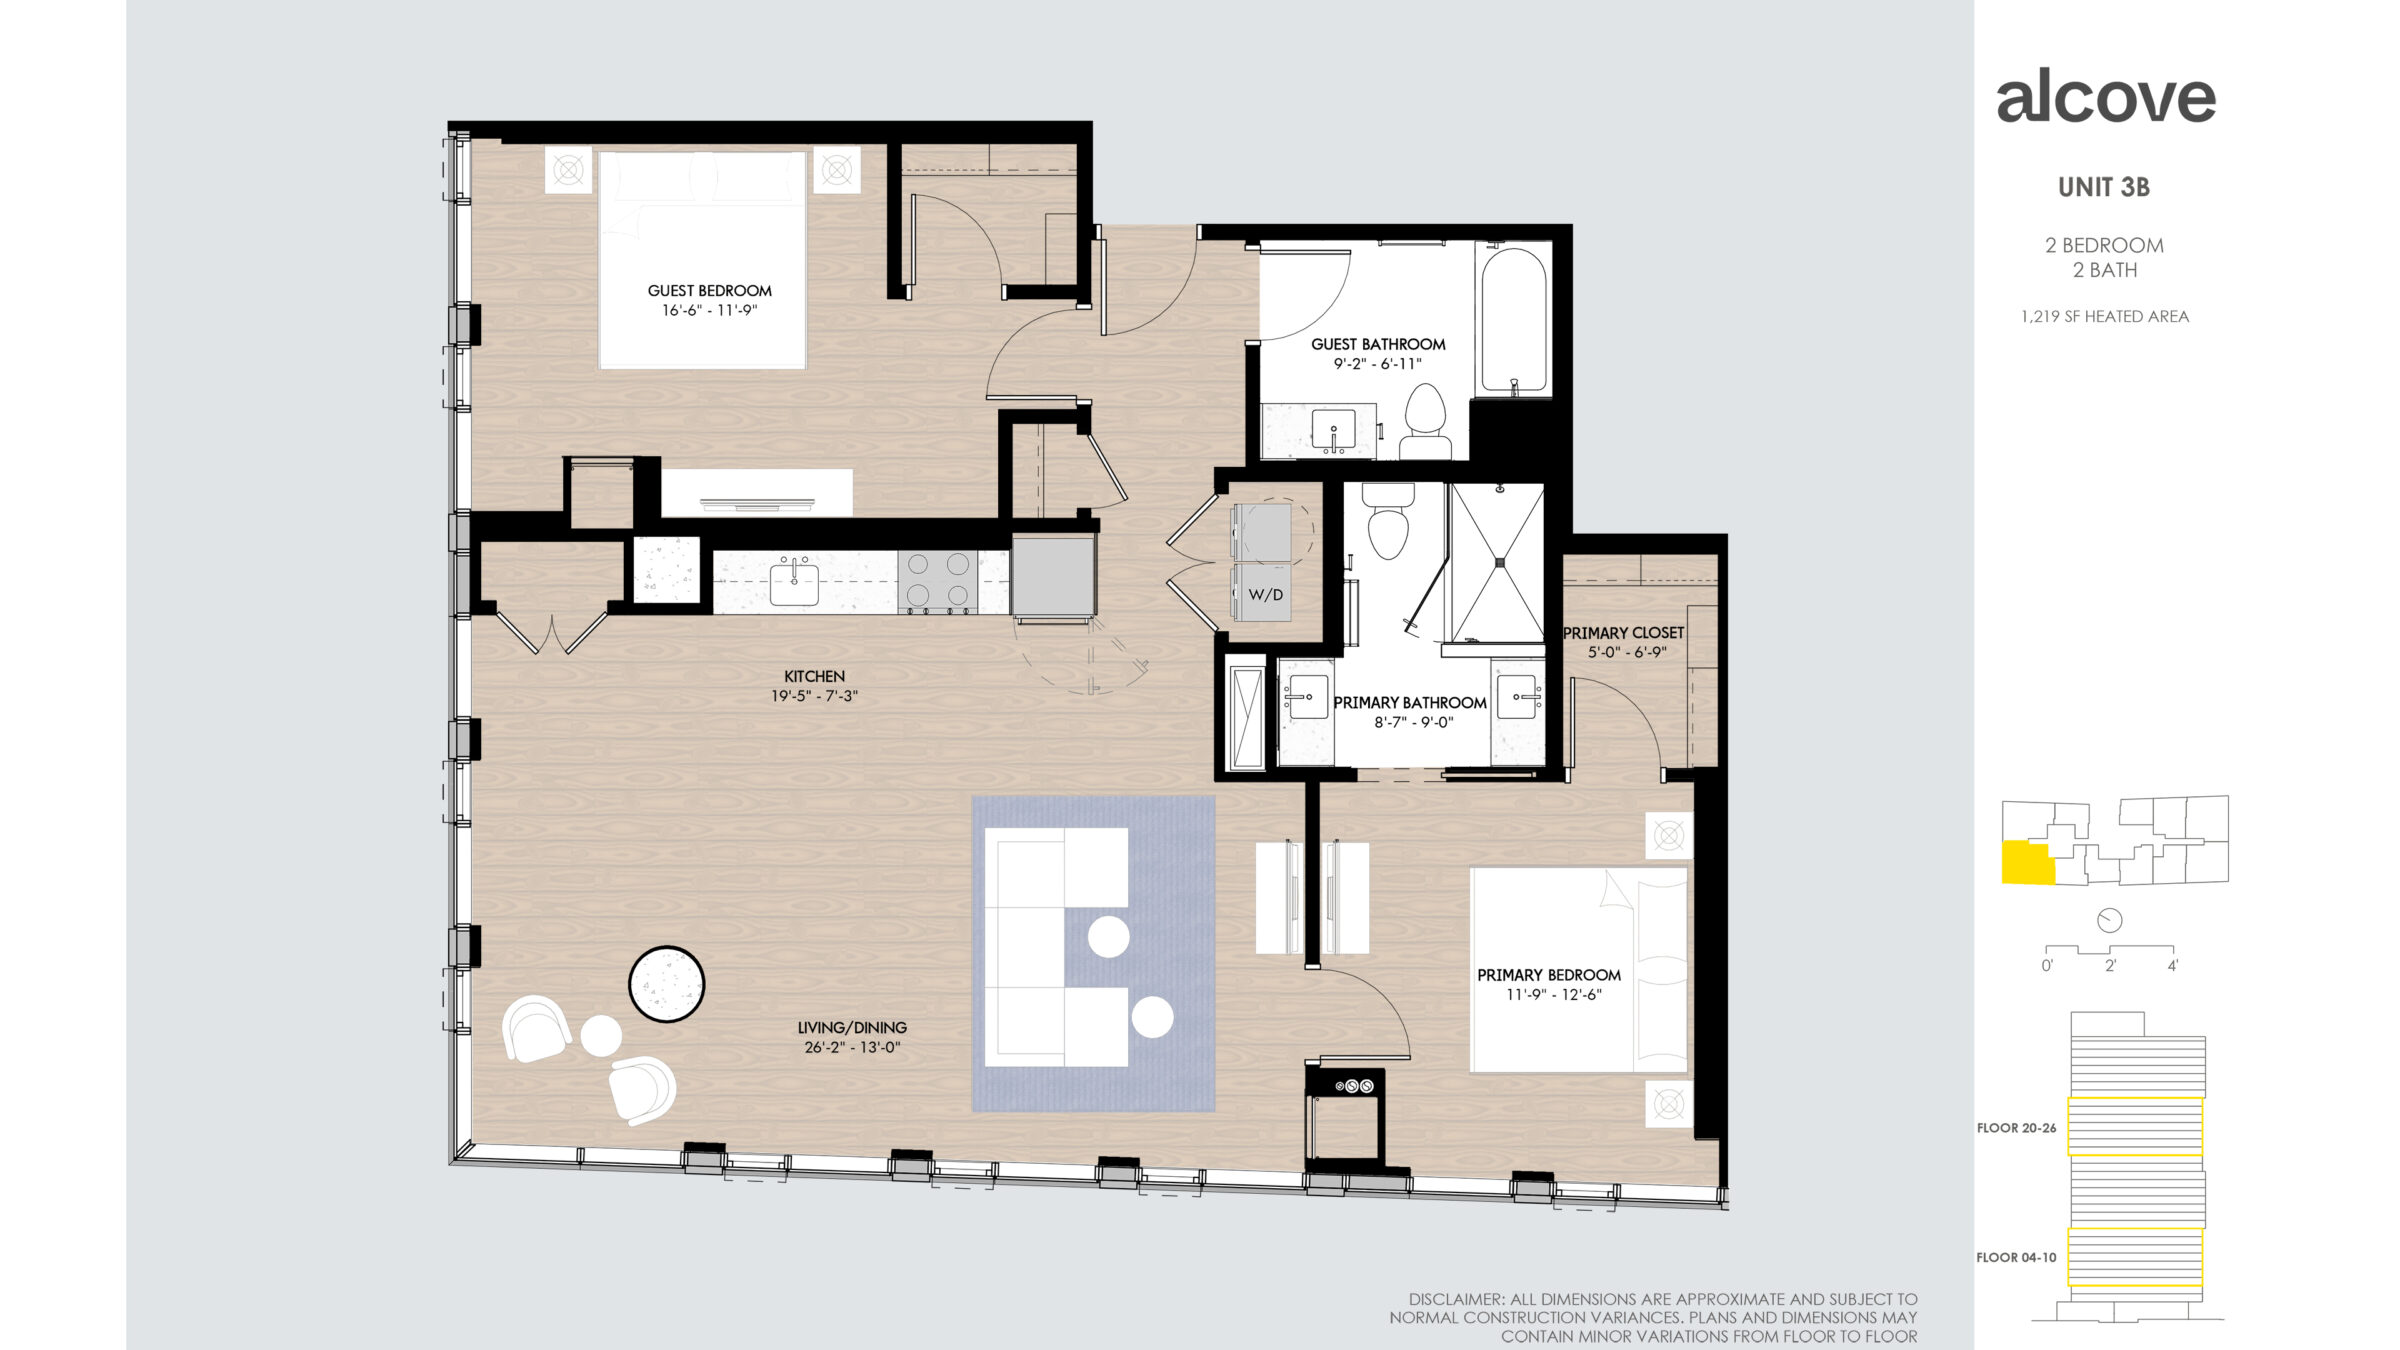 Image reads: UNIT 3B 2 BEDROOM 2 BATH 1219 SF HEATED AREA Floor 20-26 Floor 04-10 Disclaimer: all dimensions are approximate and subject to normal construction variances. Plans and dimensions may contain minor variations from floor to floor.